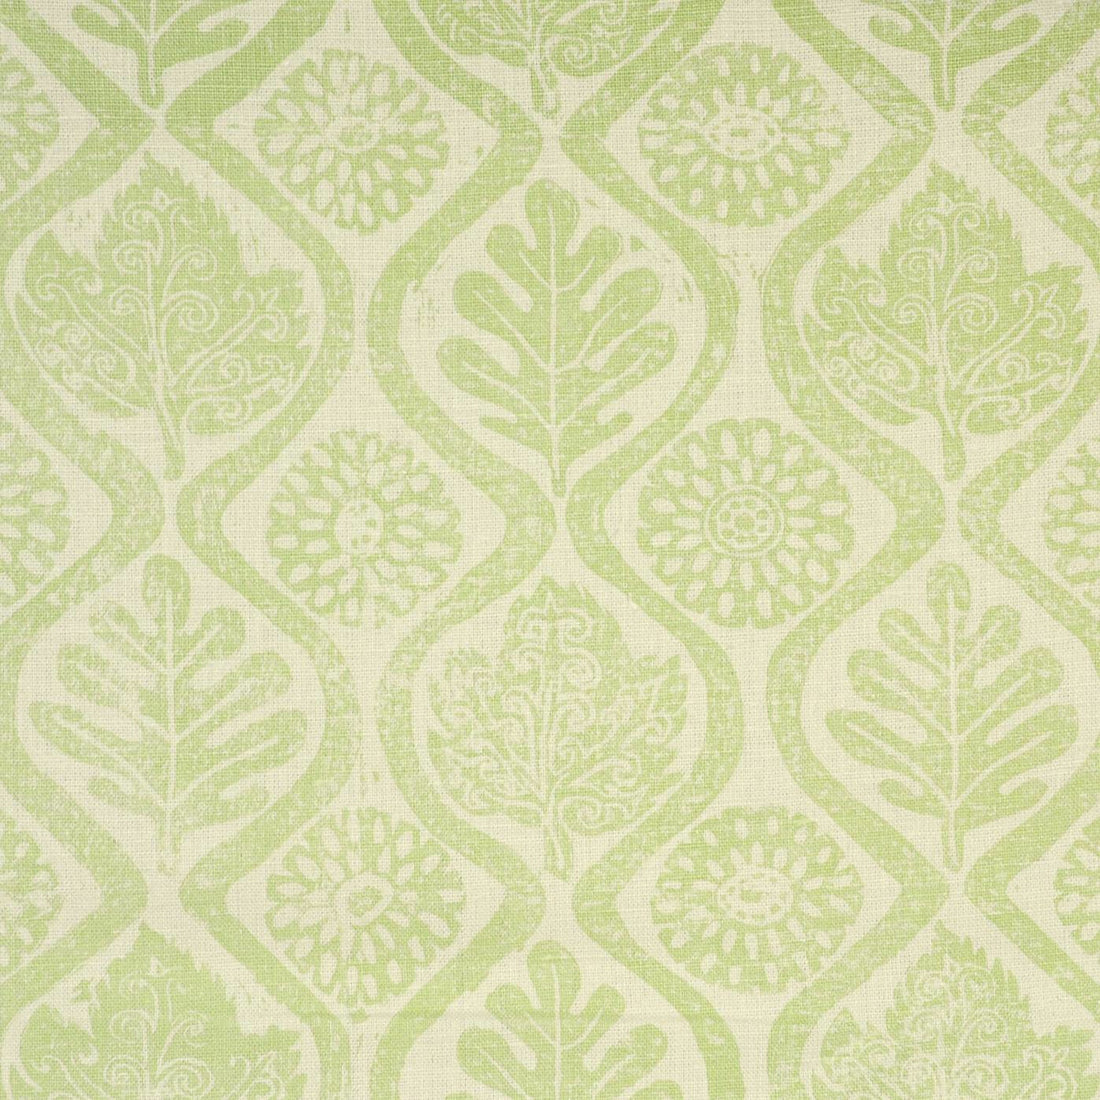 Oakleaves fabric in lime color - pattern BFC-3514.23.0 - by Lee Jofa in the Blithfield collection